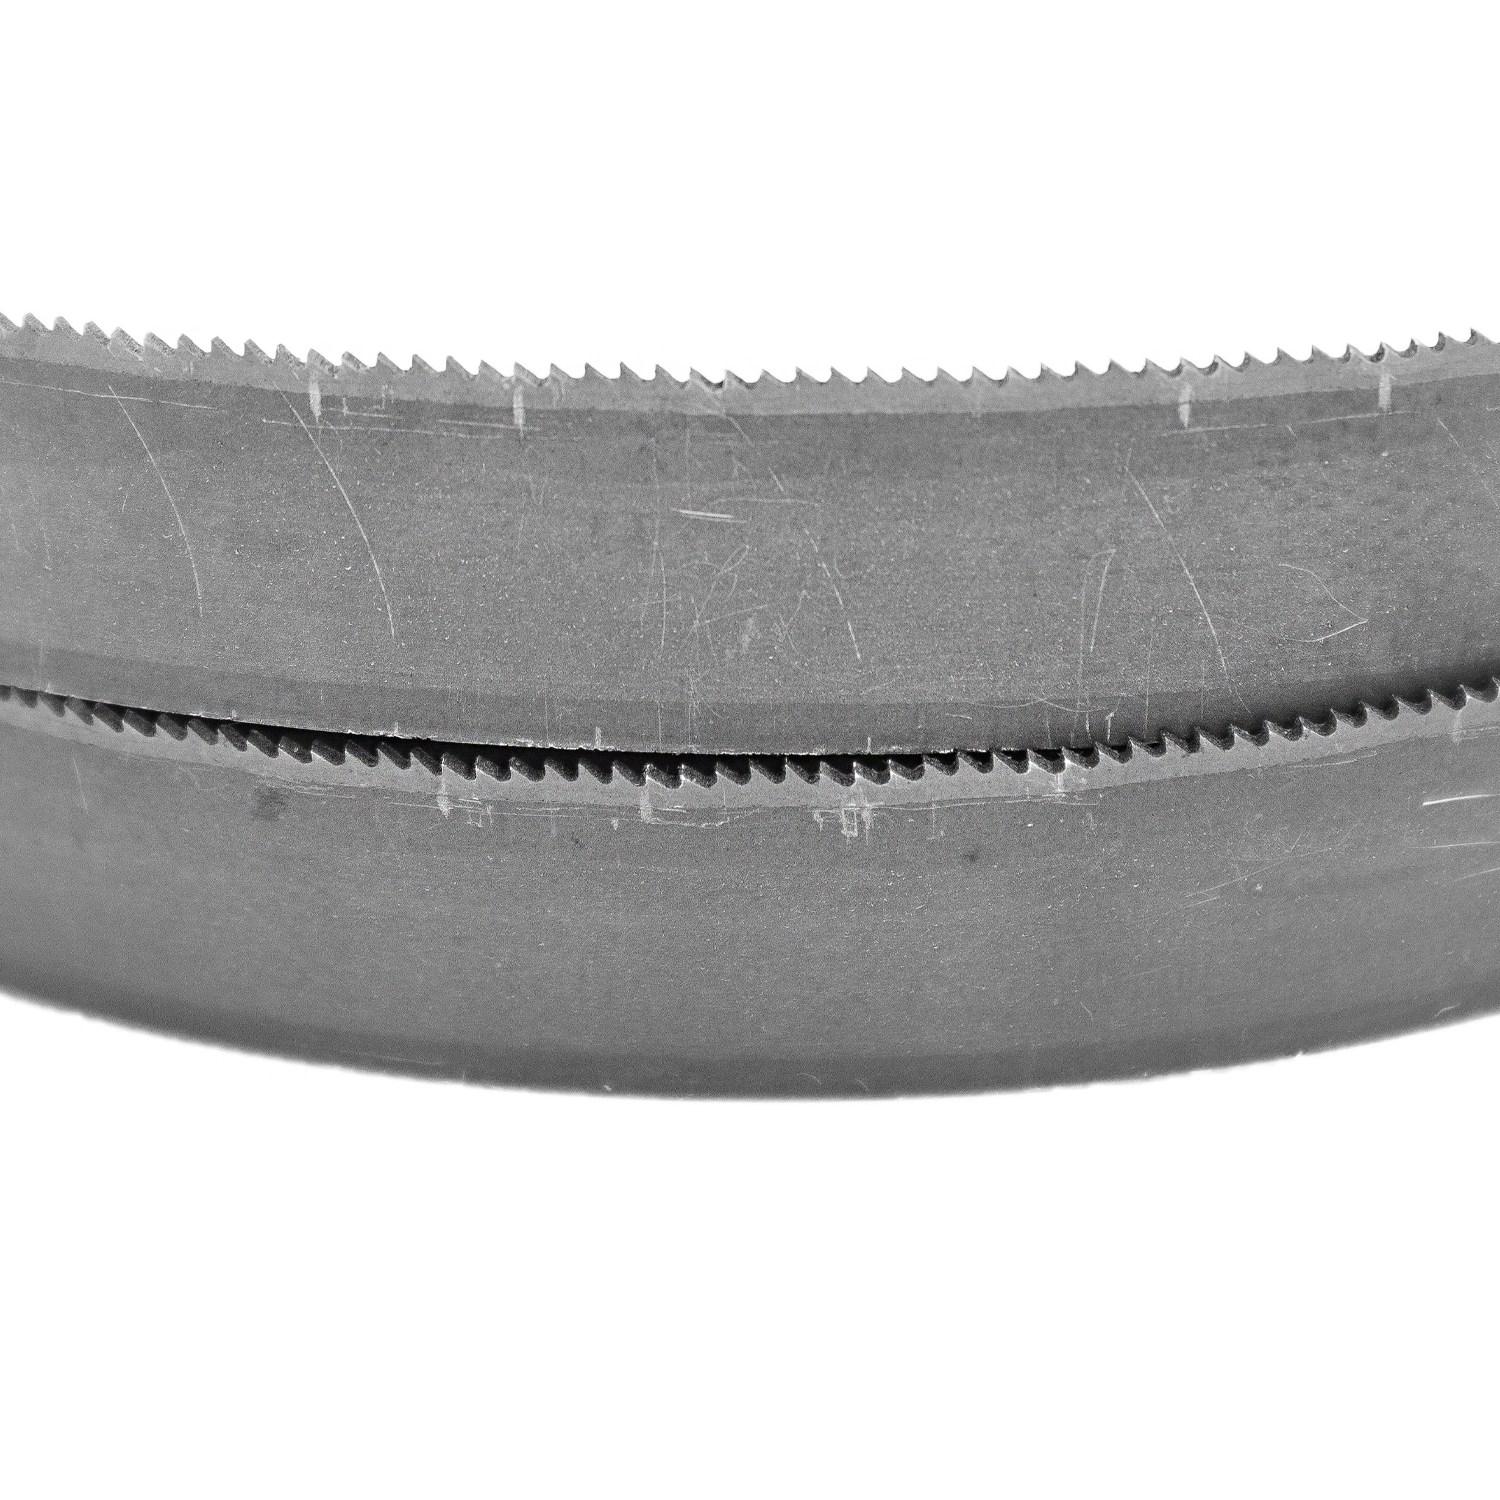 Pipeworker band saw blade 898.52mm